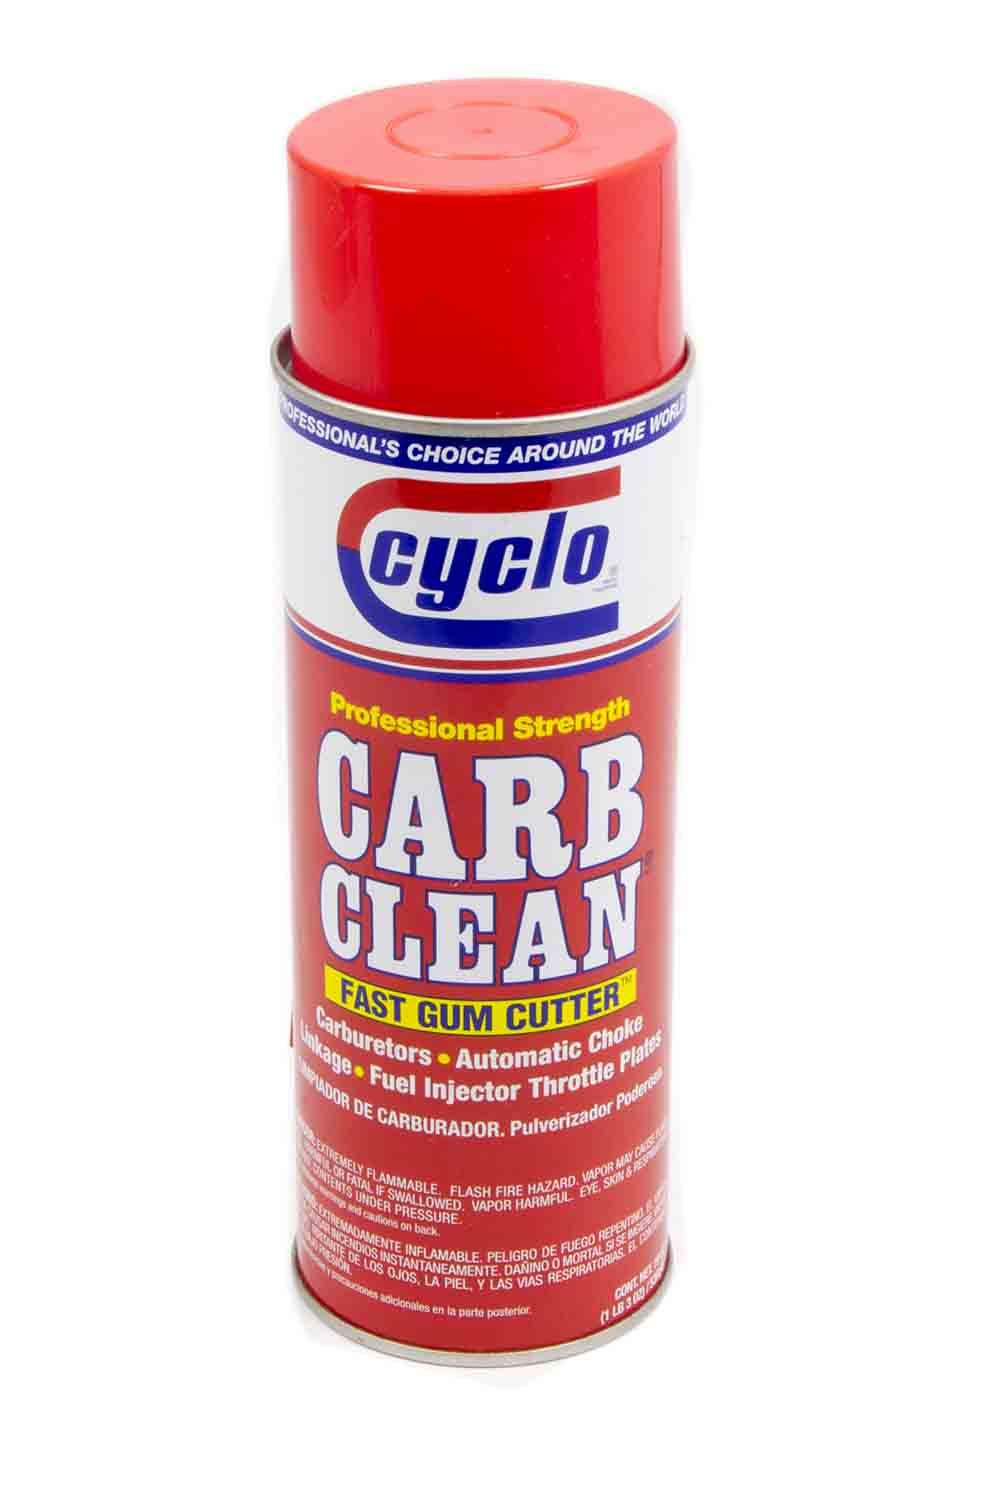 Cyclo 19 Oz. Carb Cleaner CCLC5